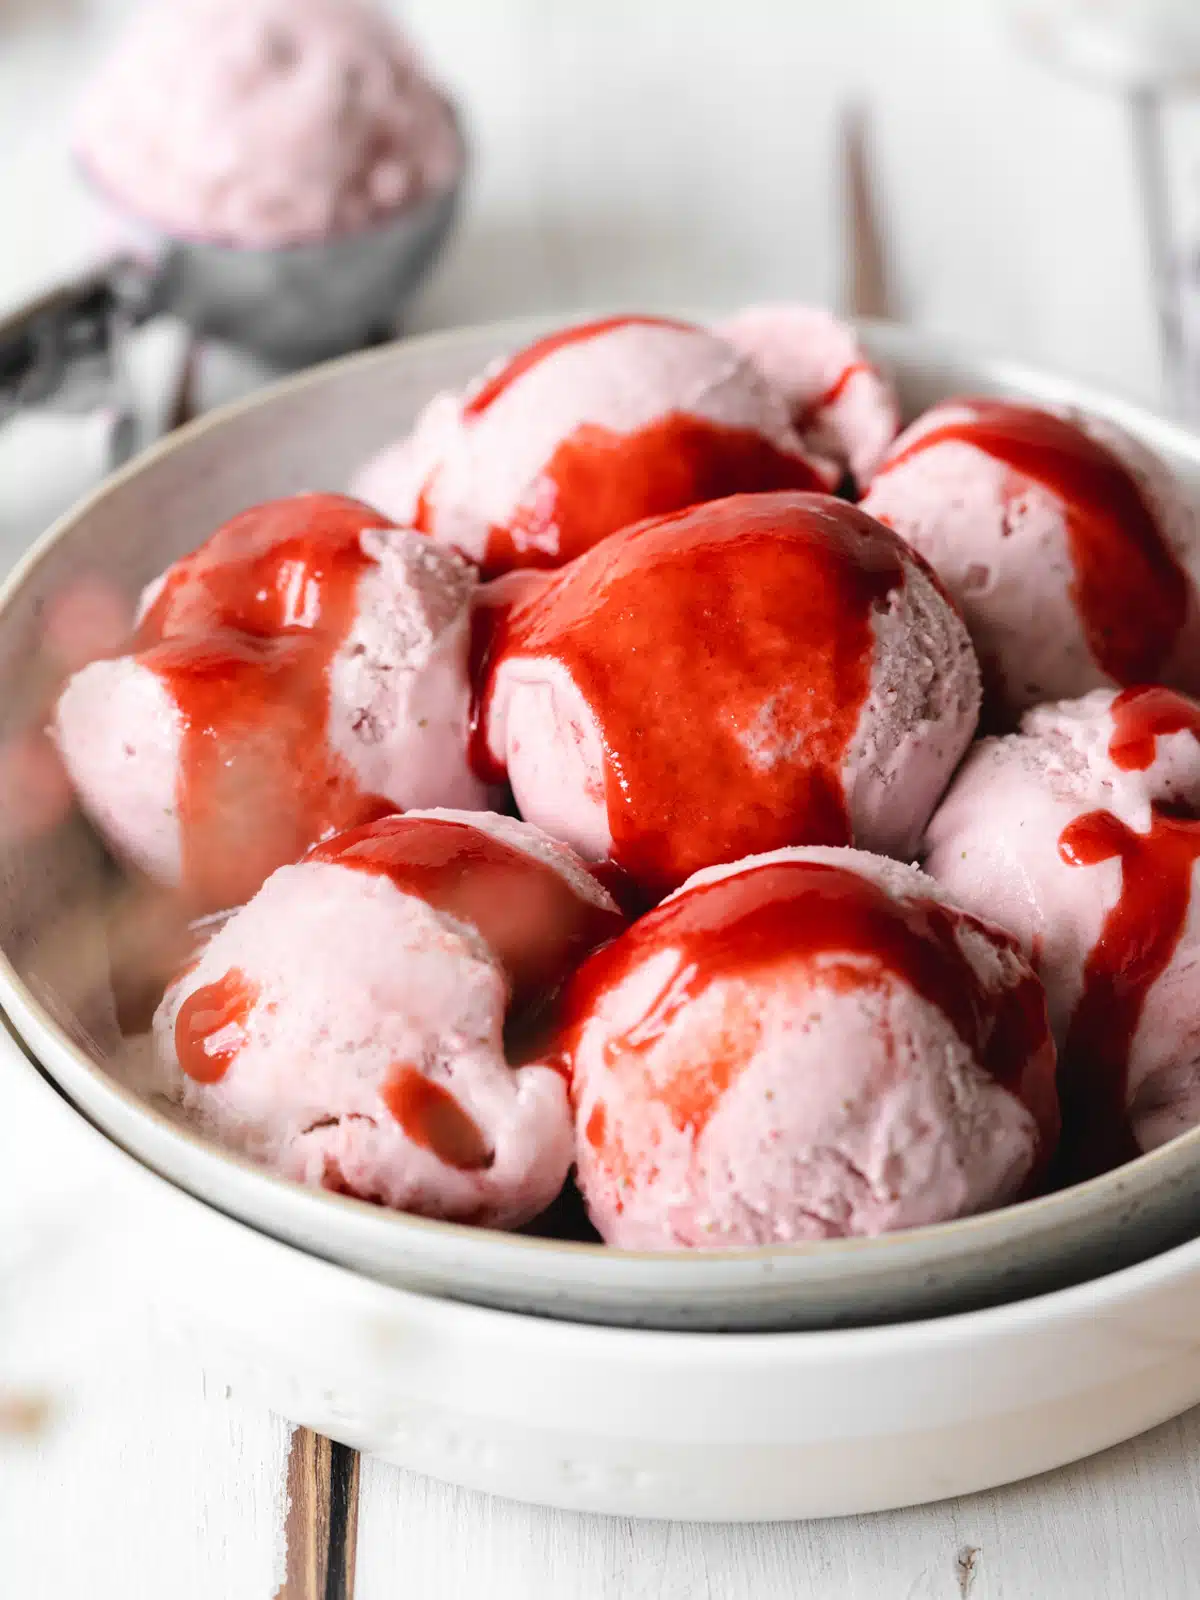 a bowl filled with scoops of homemade vegan ice cream drenched in strawberry coulis.